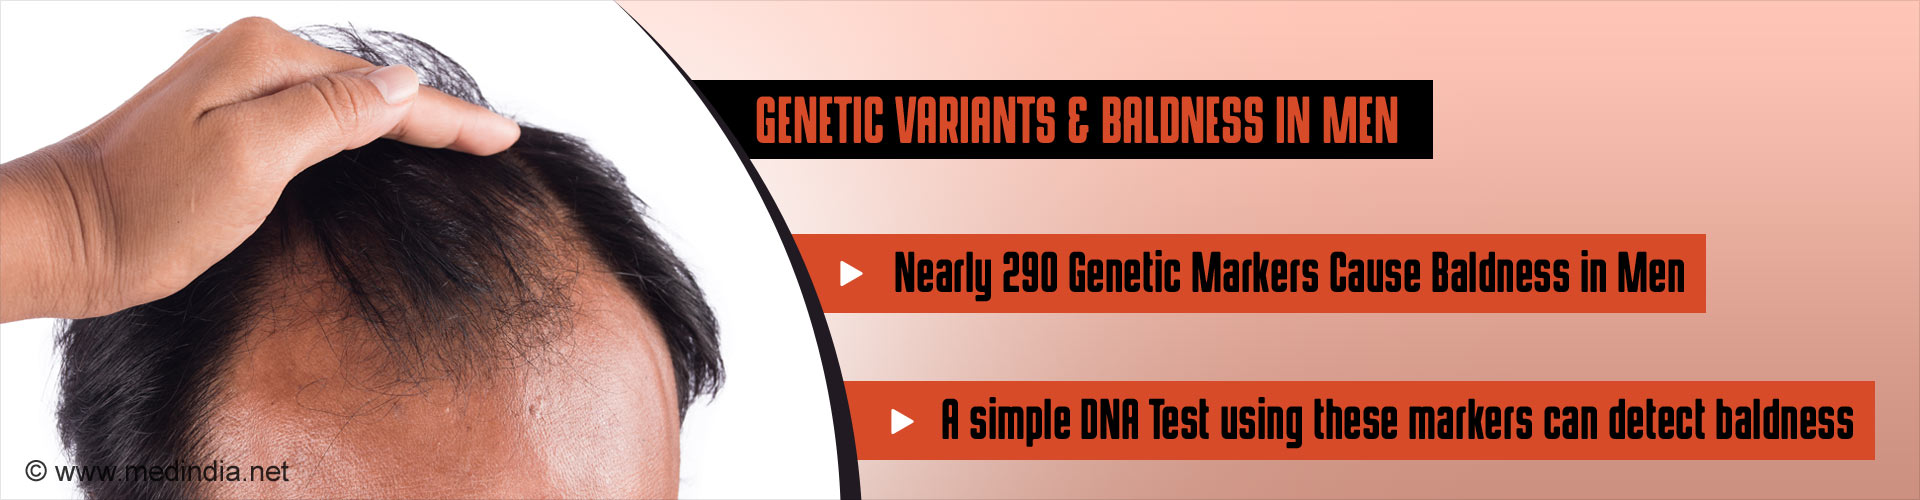 Genetic variants & baldness in men
- Nearly 290 genetic markers cause baldness in men
- A simple DNA ysing these markers can detect baldness